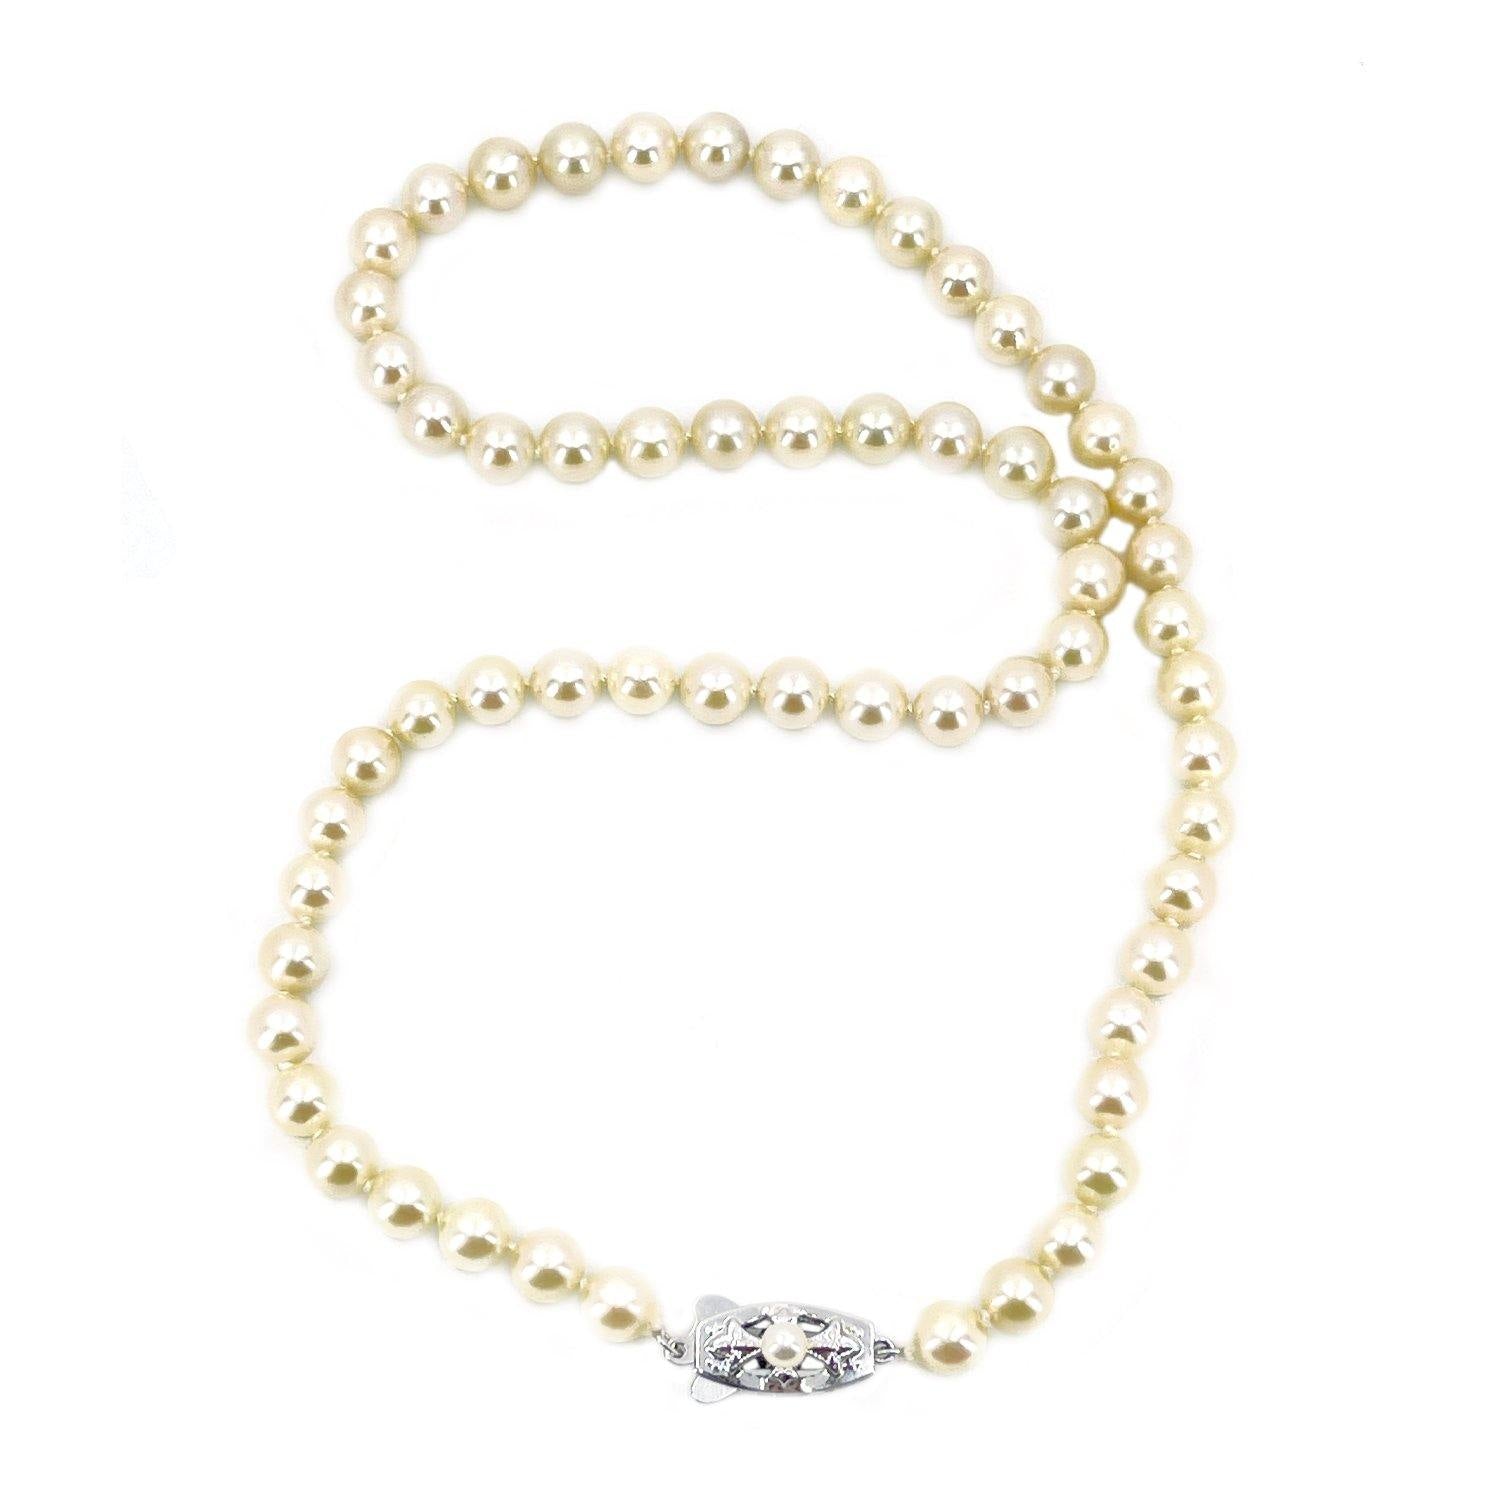 Cream Retro Japanese Saltwater Cultured Akoya Pearl Necklace - Sterling Silver 18 Inch